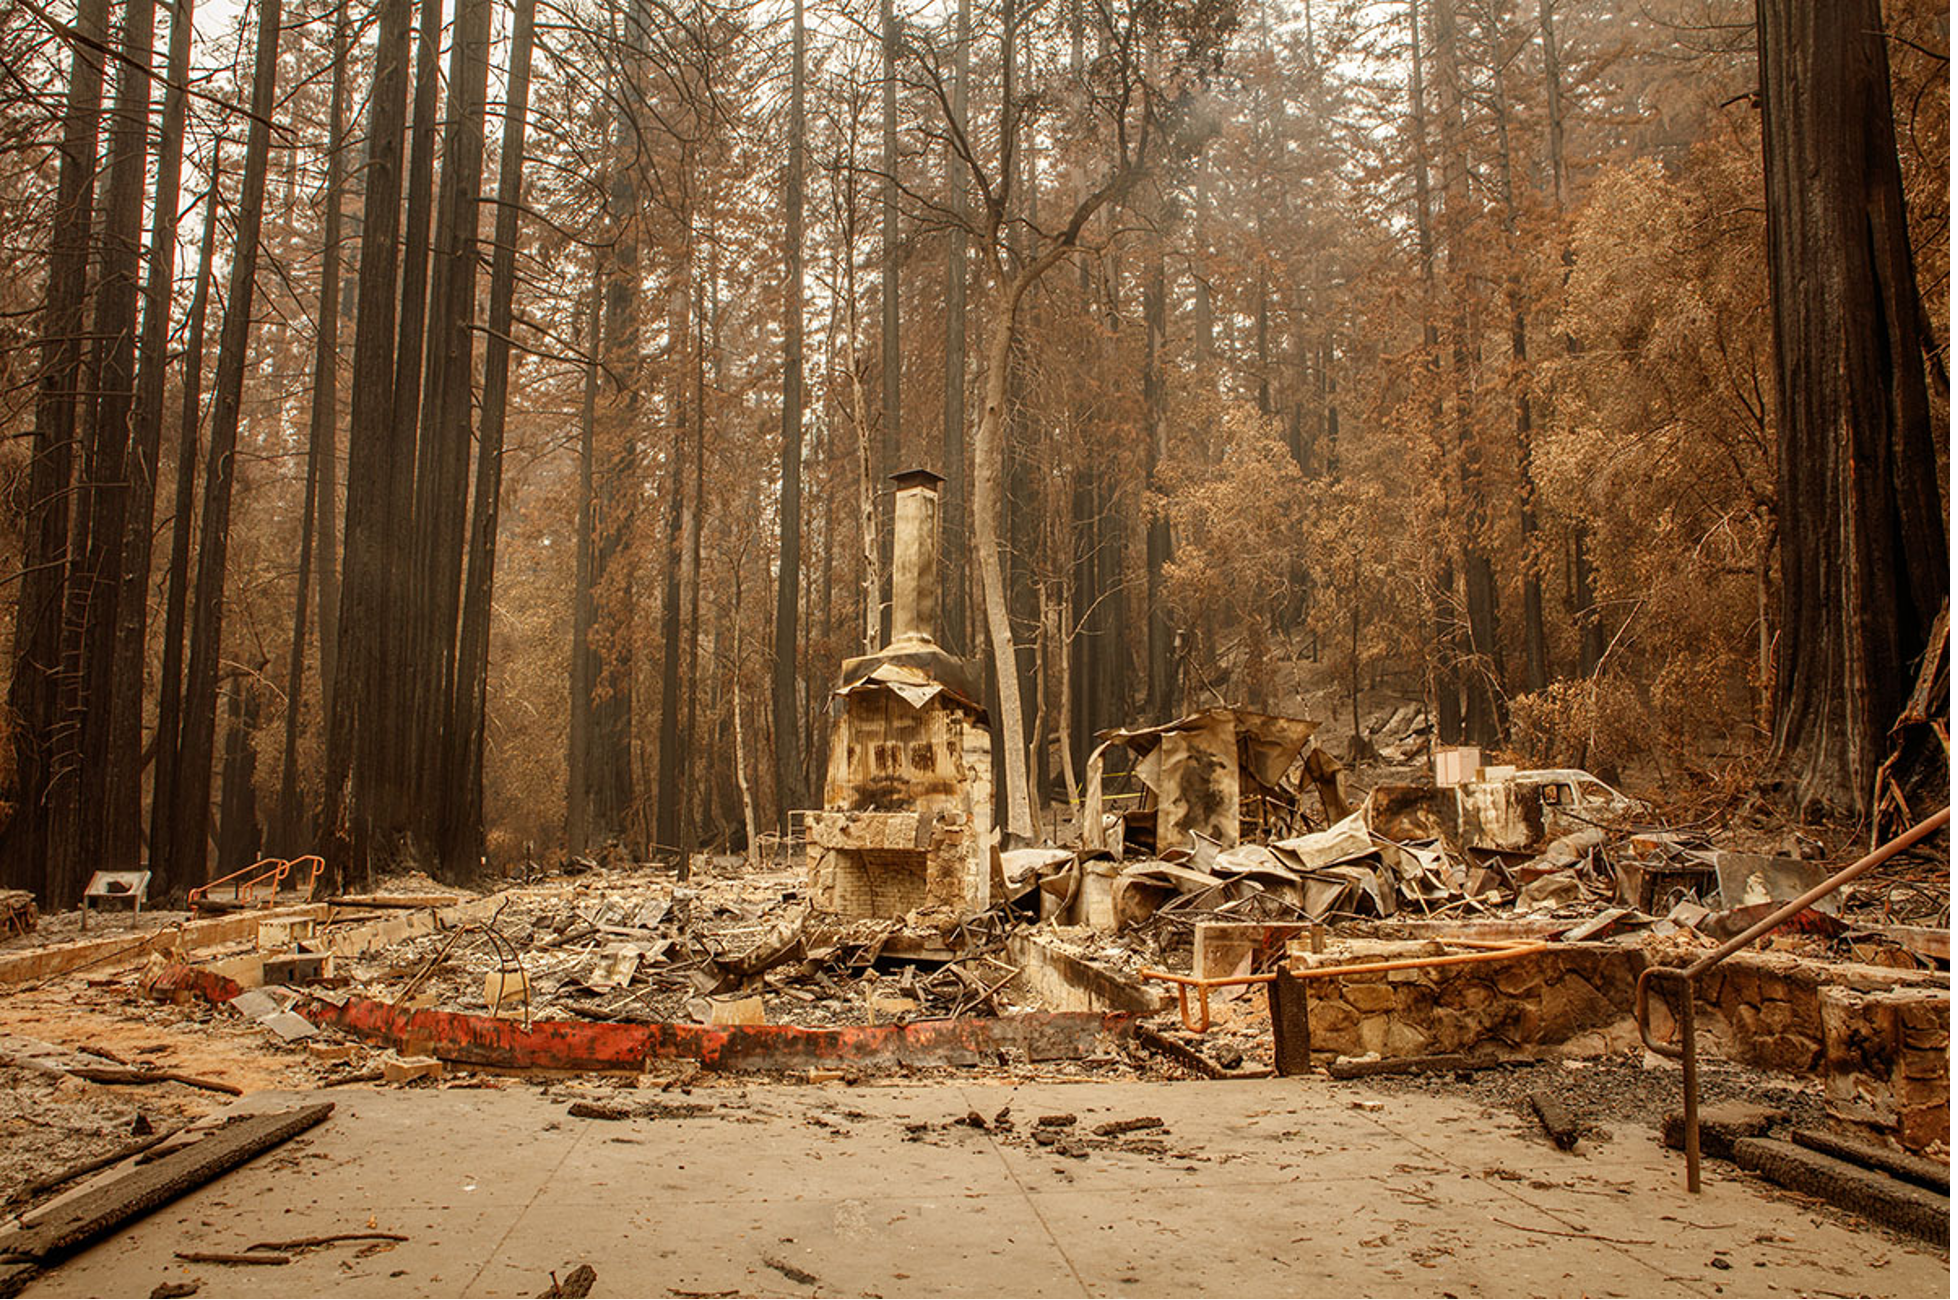 Big Basin Redwood State Park's Administrative Headquarters, destroyed by the CZU Lighting Complex fire in 2020.